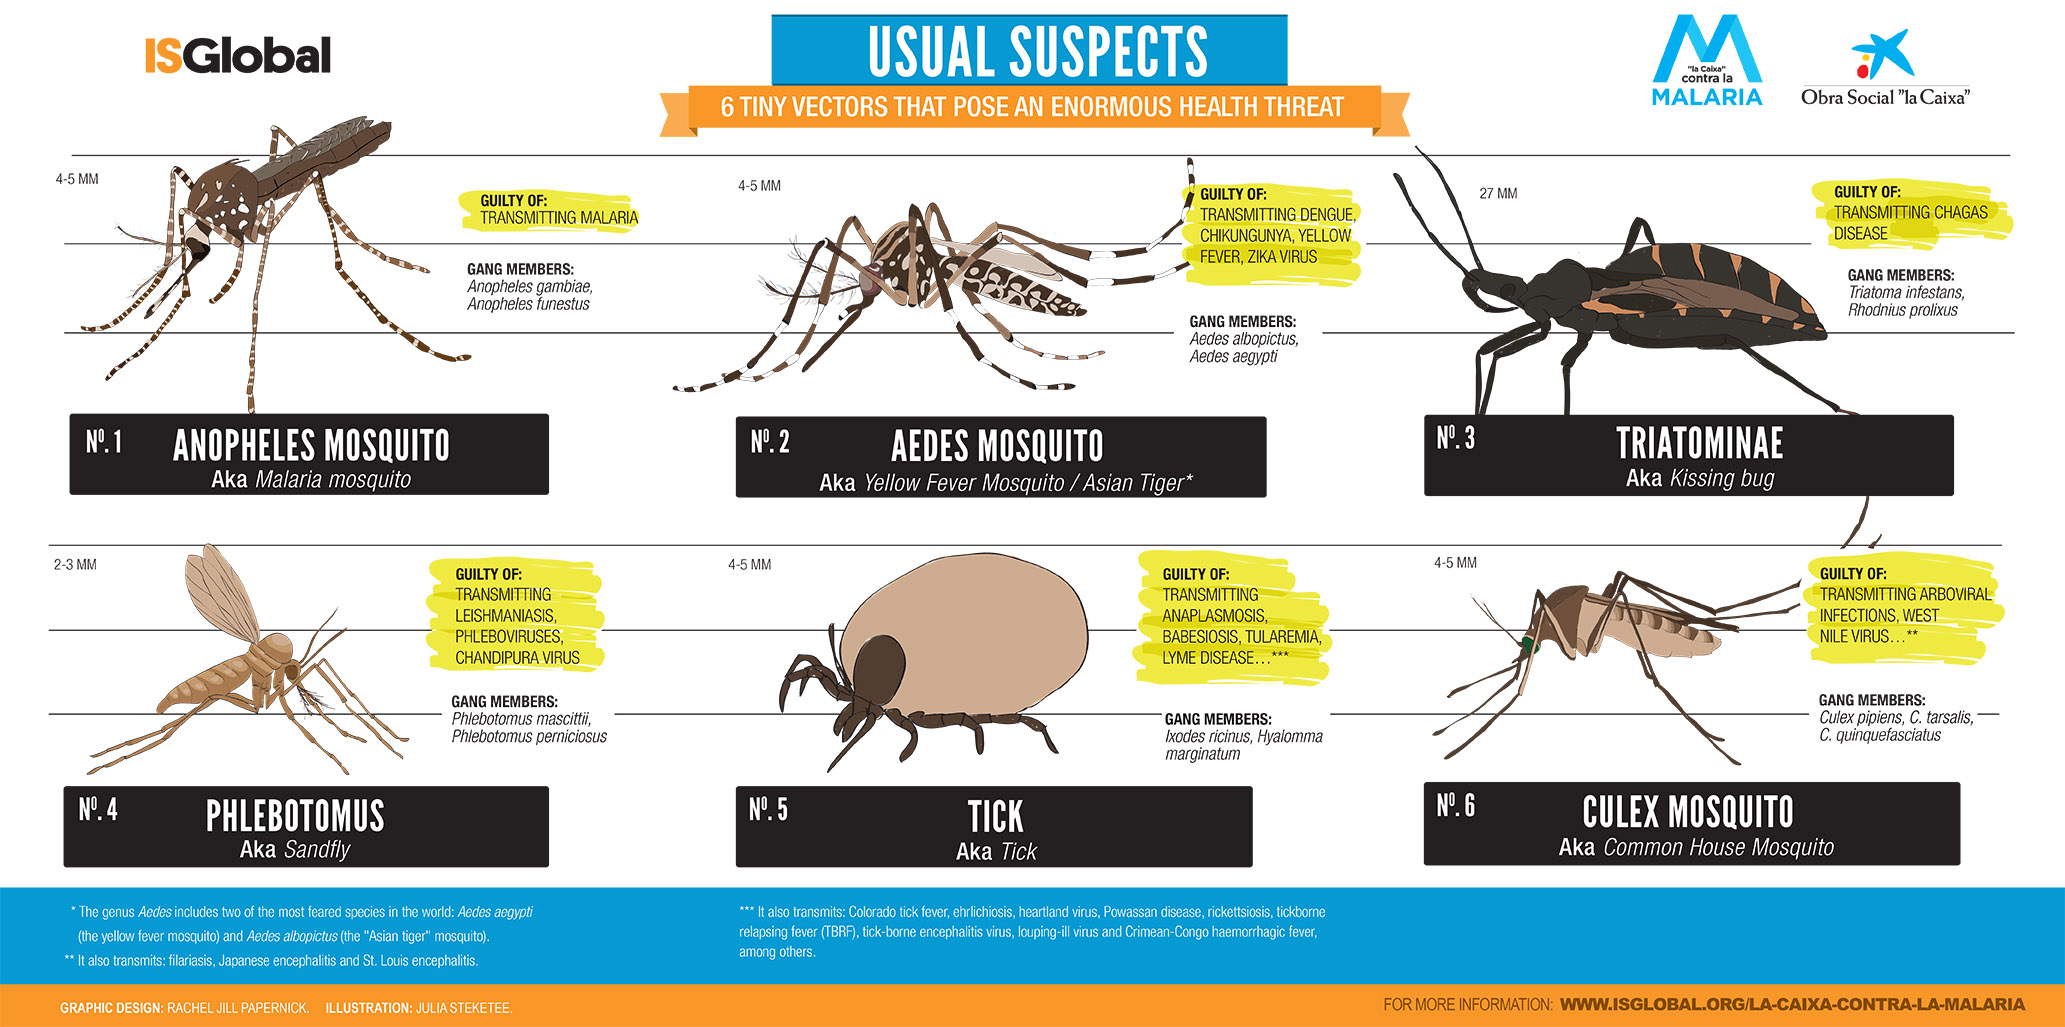 Usual Suspects Infografic Series: Summary